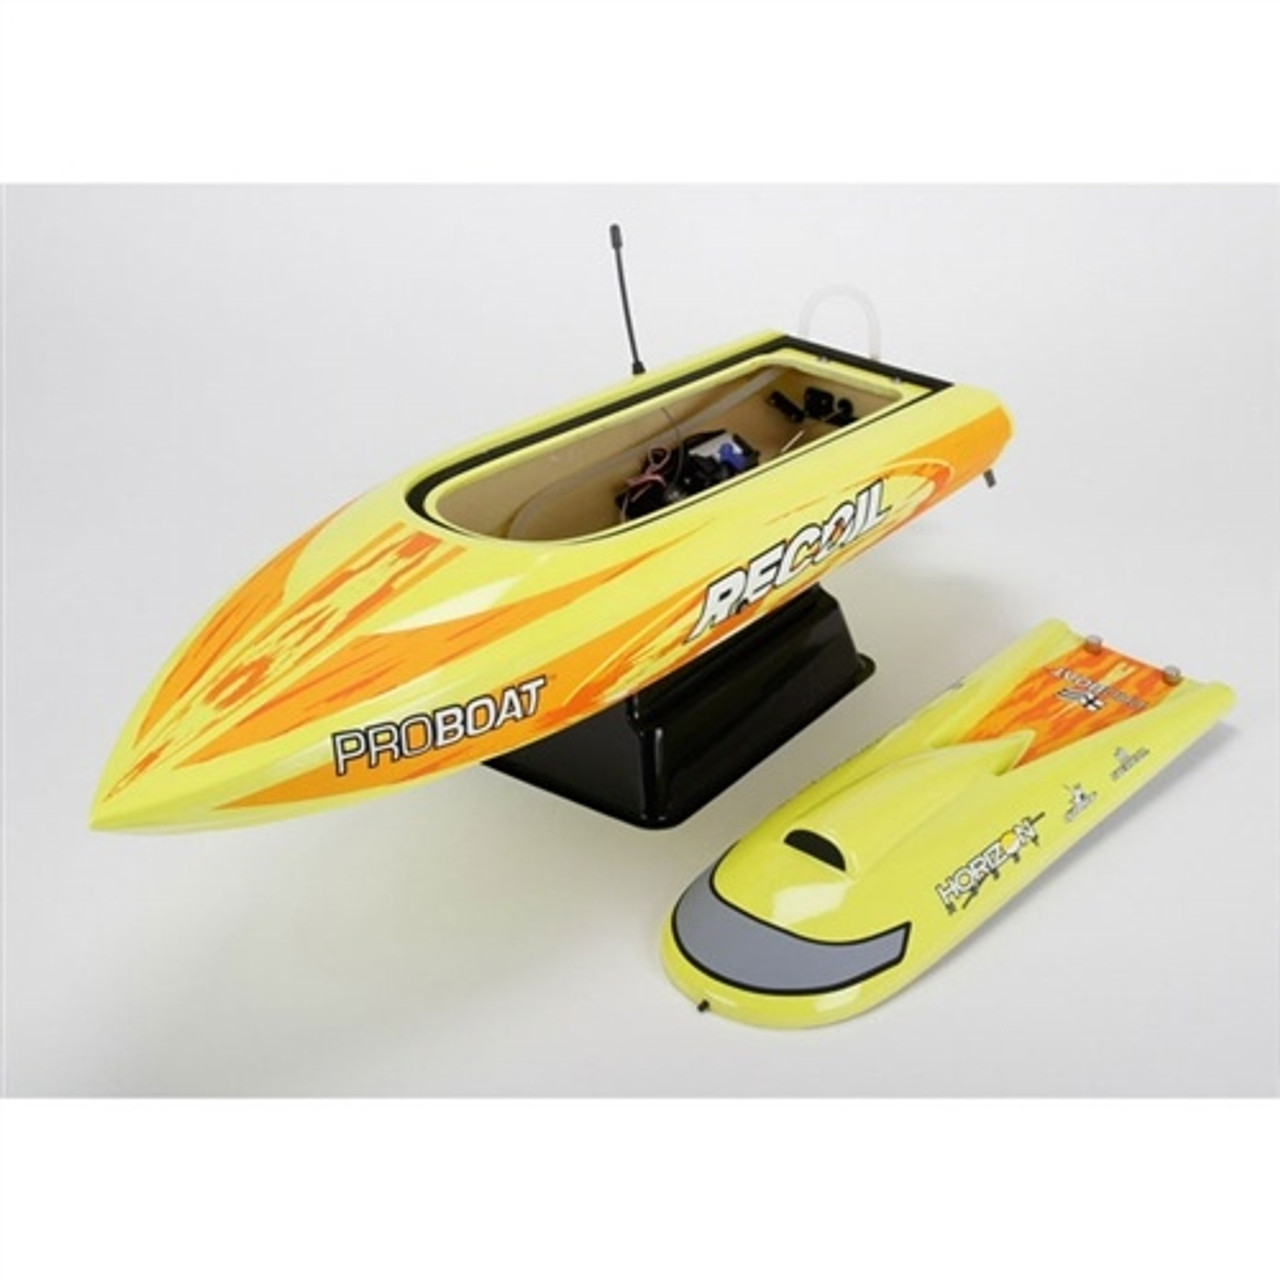 recoil rc boat